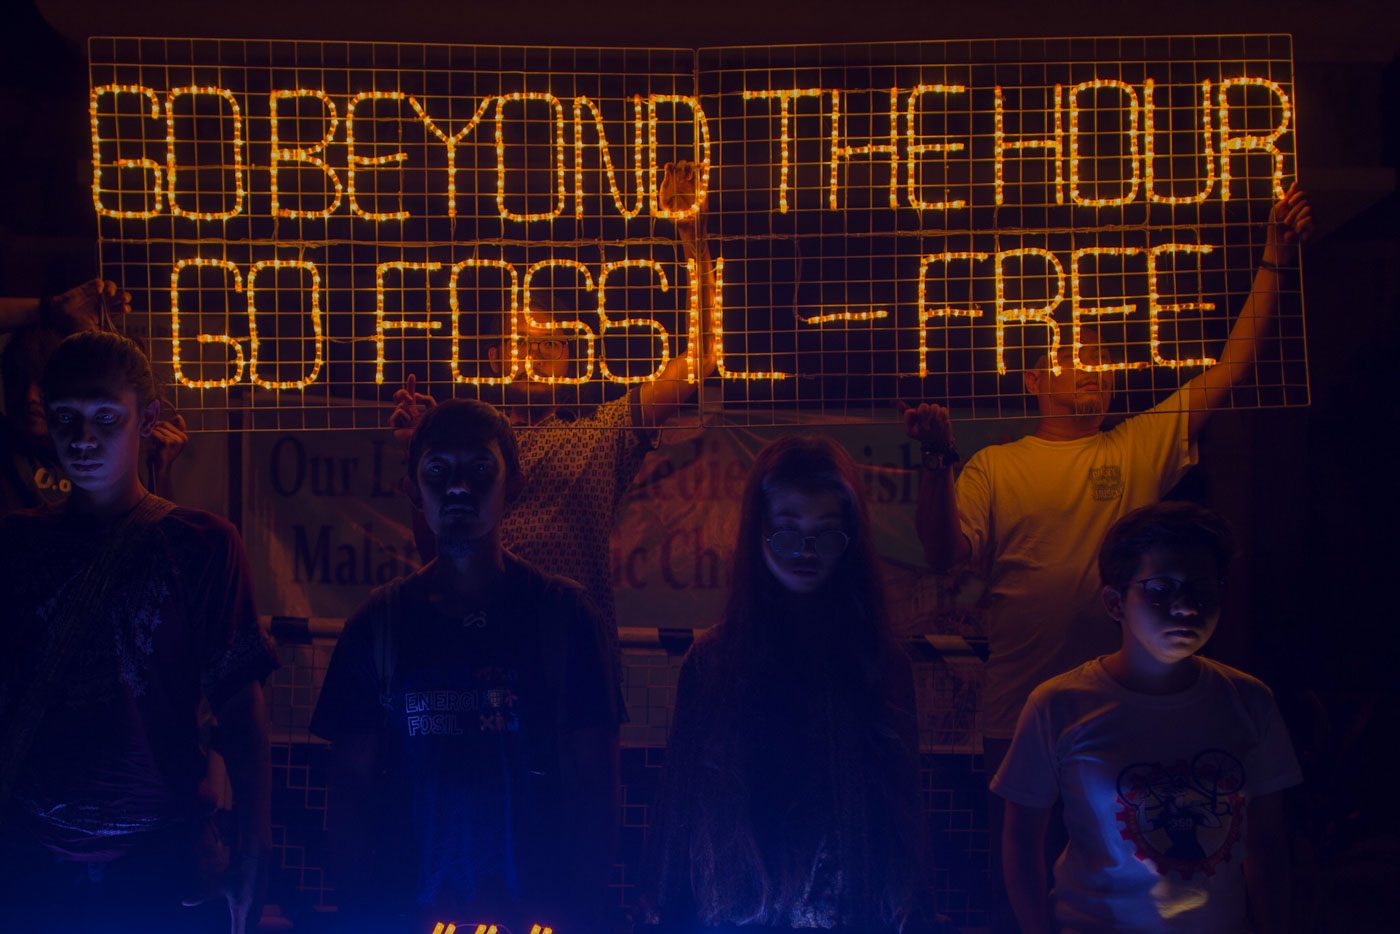 SAVE THE ENVIRONMENT. Climate activists from 350.org Pilipinas, light up LED banners at Malate Catholic Church. Photo by Maria Tan/Rappler 